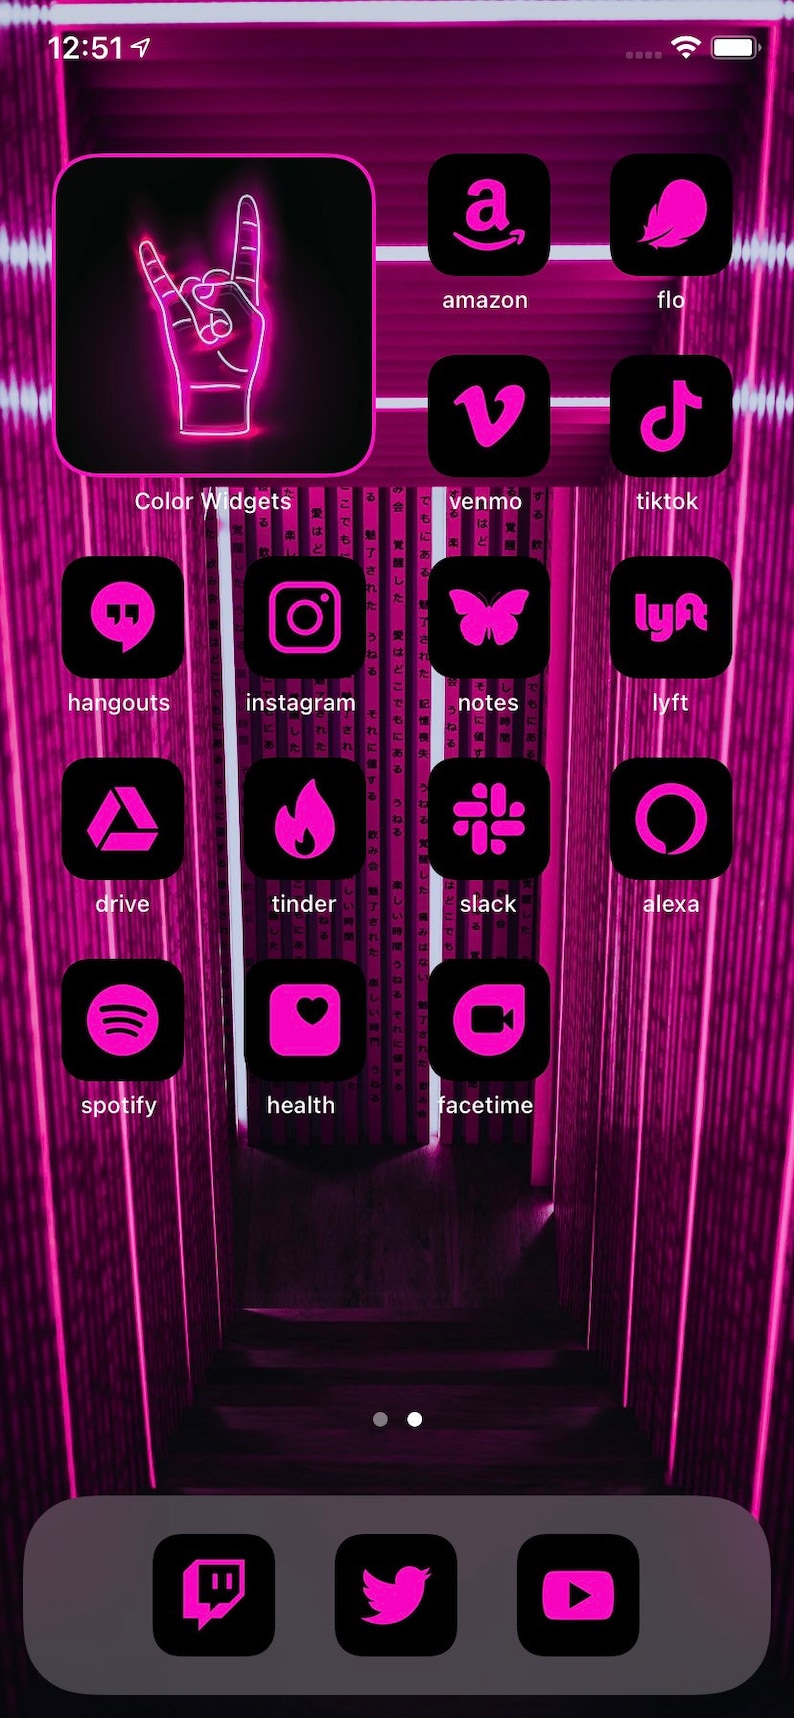 App Icons Neon Pink Black Pink, Aesthetic Home Screen Colorful App Icons, Widgets Neon, iPhone, Android image 5